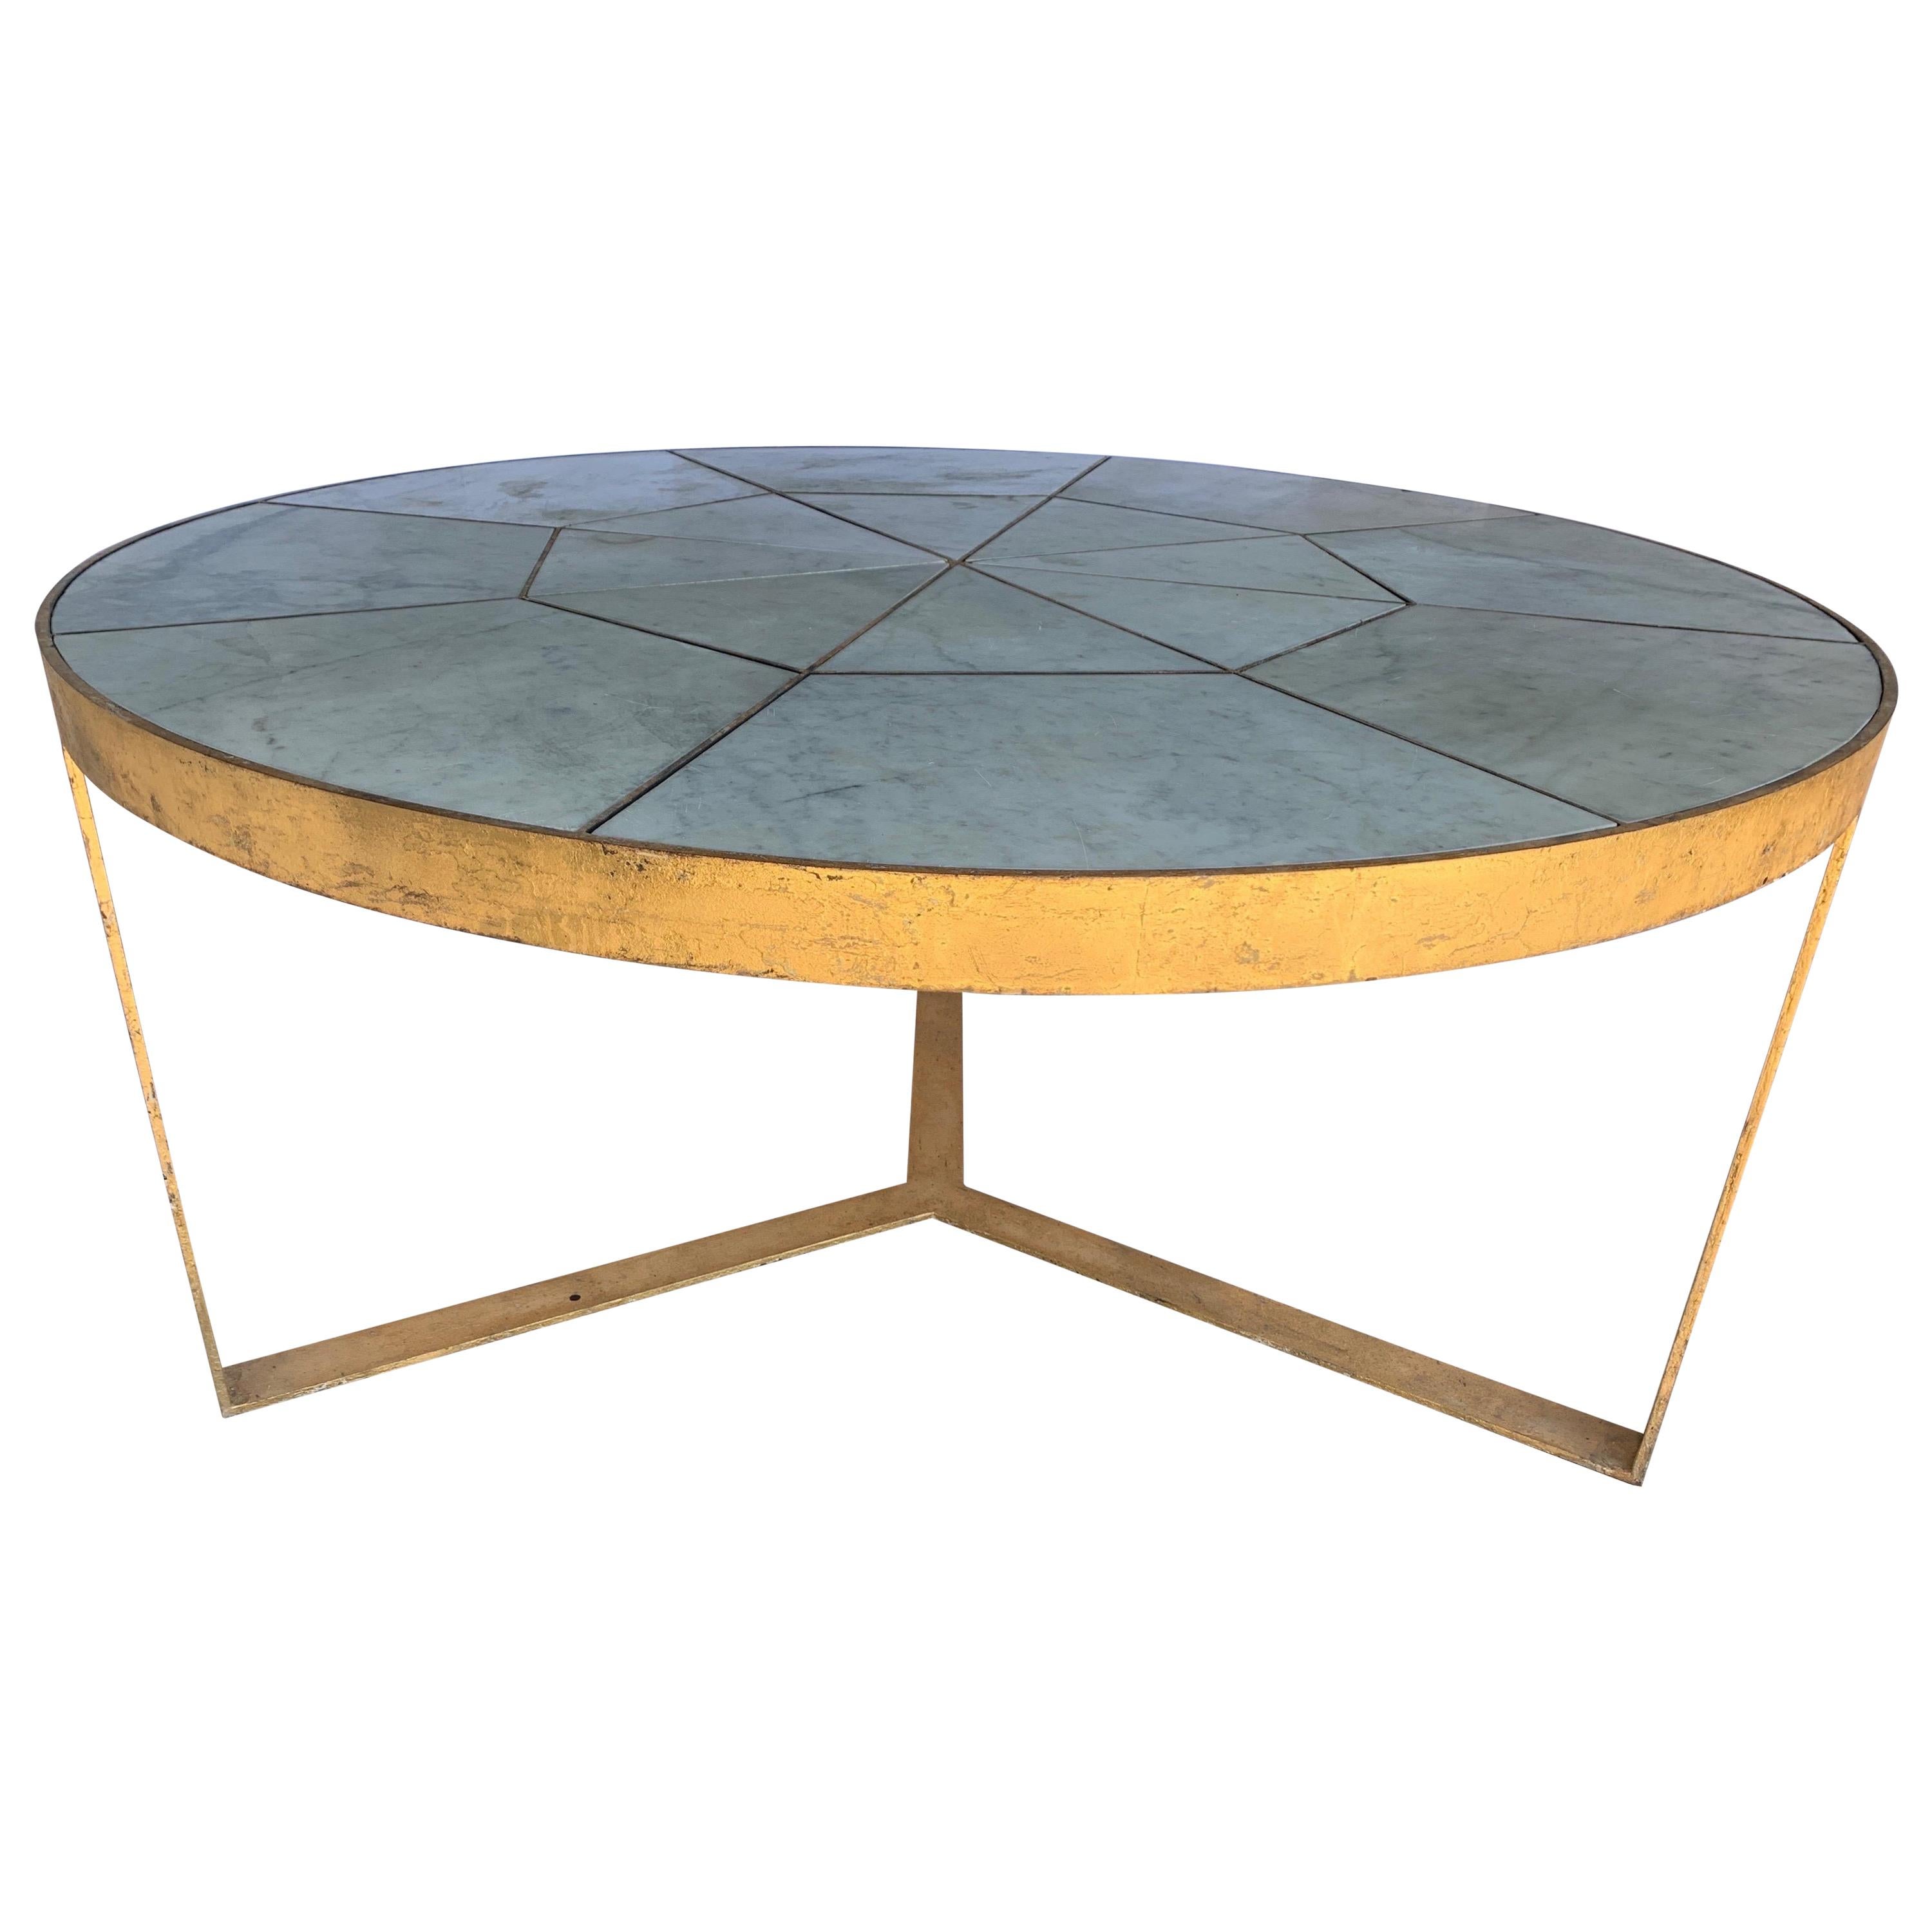 Antica Collection Fabricated Iron Gilt Dining Table with Antique Marble Inset